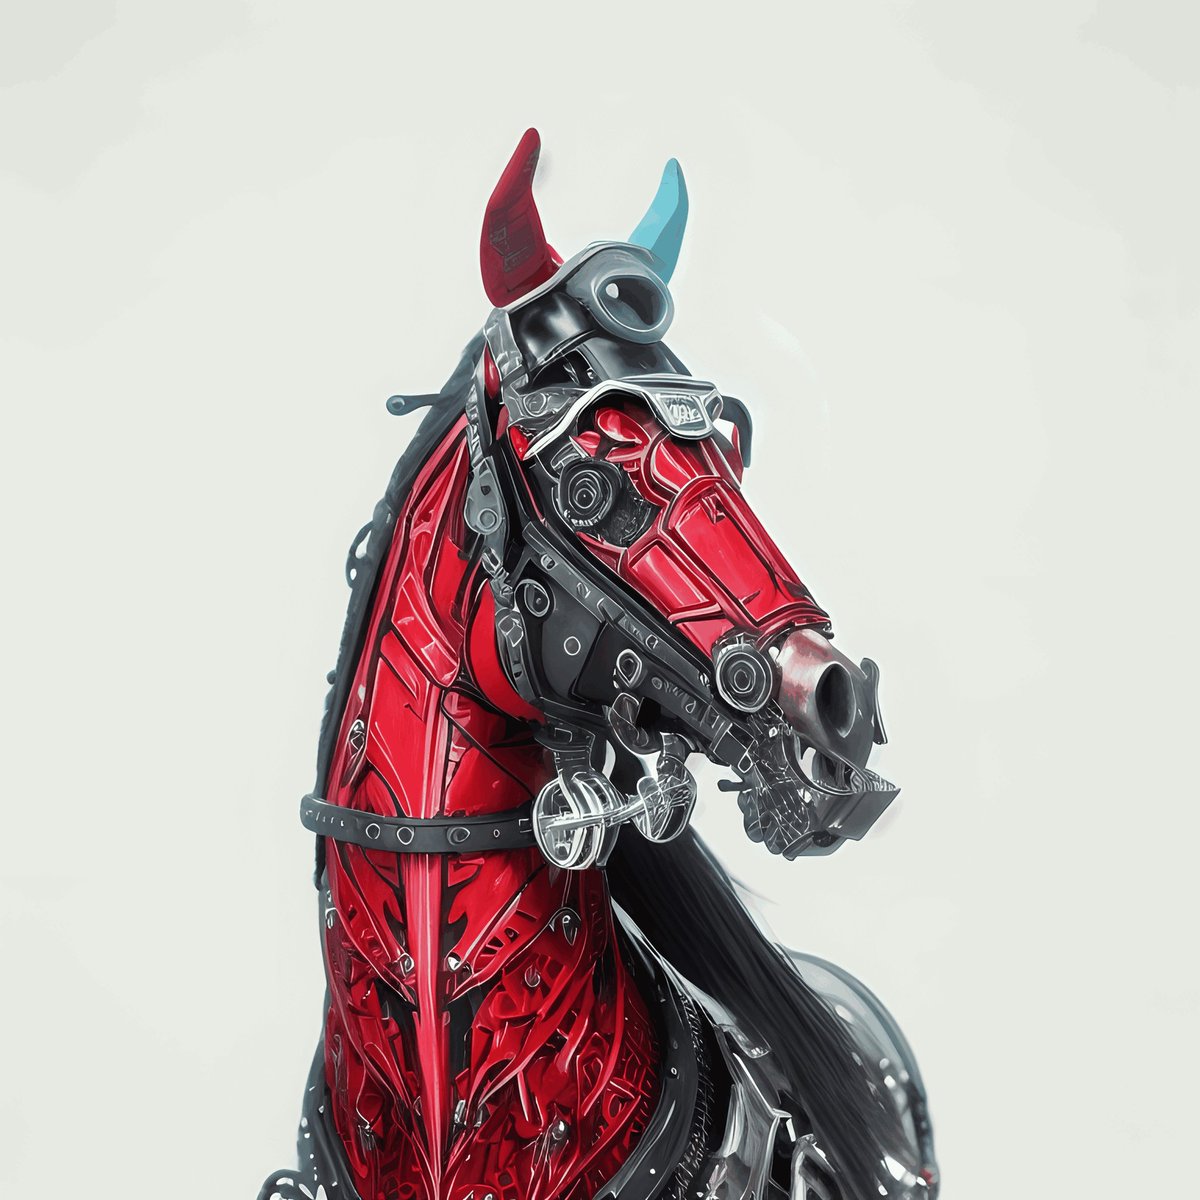 Are you still not on horseback?😱

Get your #CyborgHorse URGENTLY🚀

💰Price 5 Matic💰
       MINT HERE
⬇️⬇️⬇️⬇️⬇️⬇️⬇️⬇️⬇️⬇️⬇️⬇️
bit.ly/CyborgHorseClub
⬆️⬆️⬆️⬆️⬆️⬆️⬆️⬆️⬆️⬆️⬆️⬆️

#NFTCommumity #NFT #nftcollectors #Web3 #NFTshills #NFThelp #NFTJapan #NFTdrops